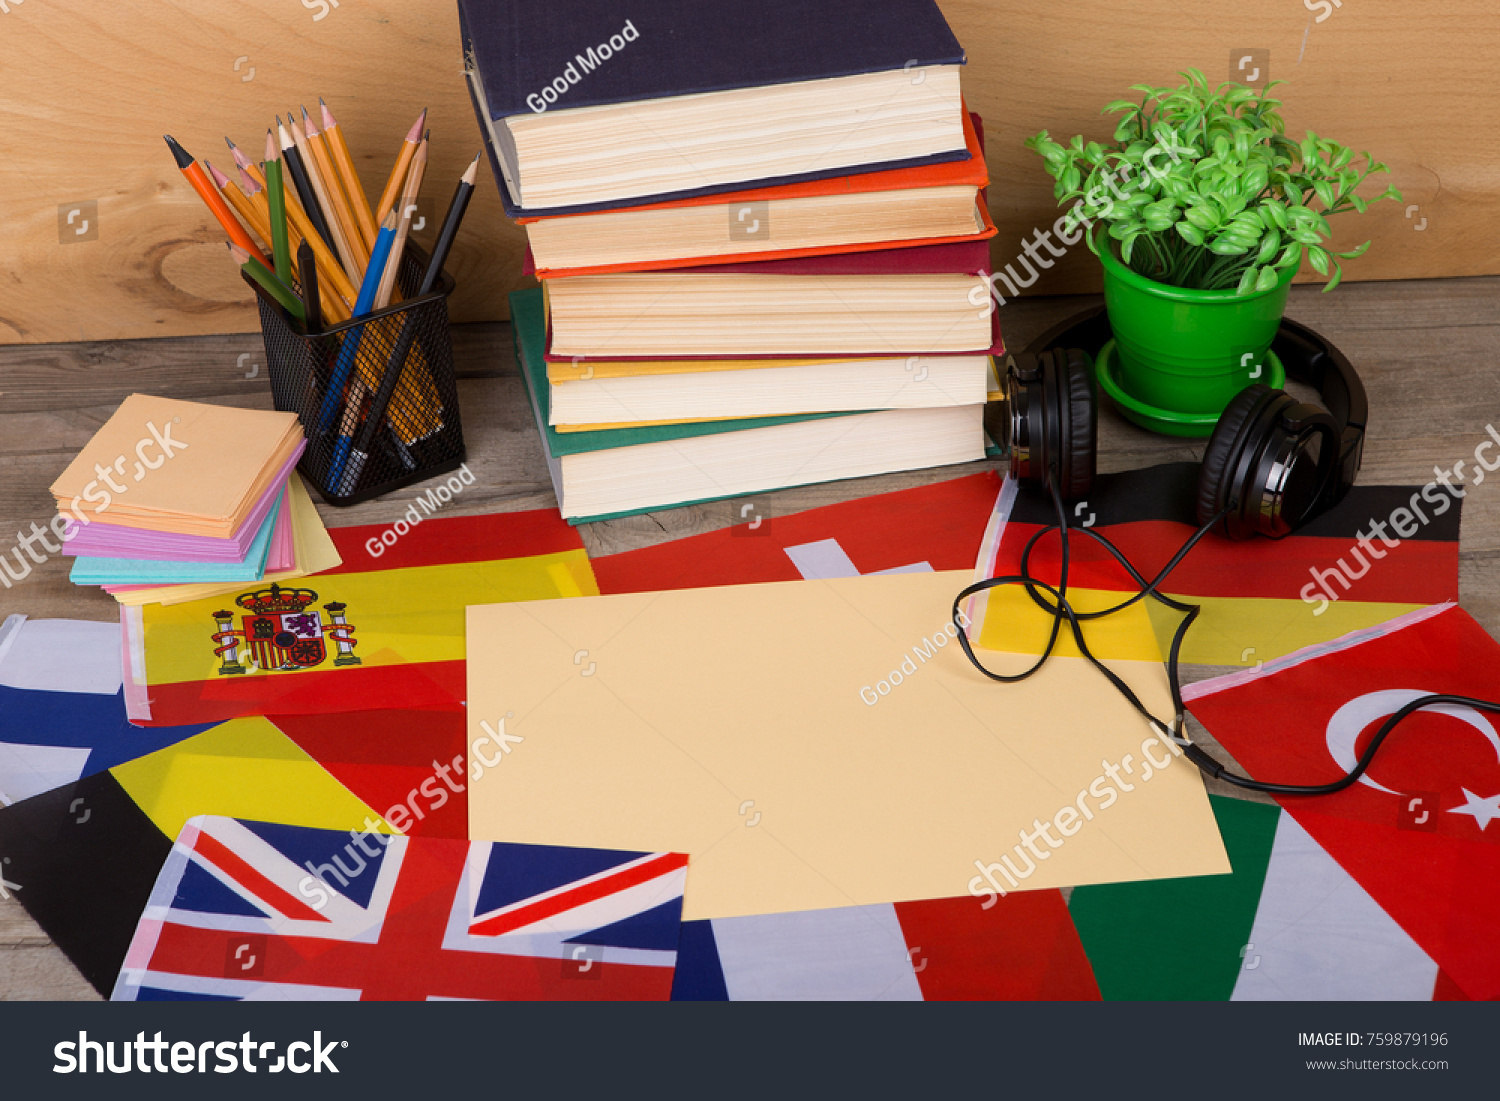 Learning languages concept - blank paper, flags, books, headphones, pencils on wooden background #759879196